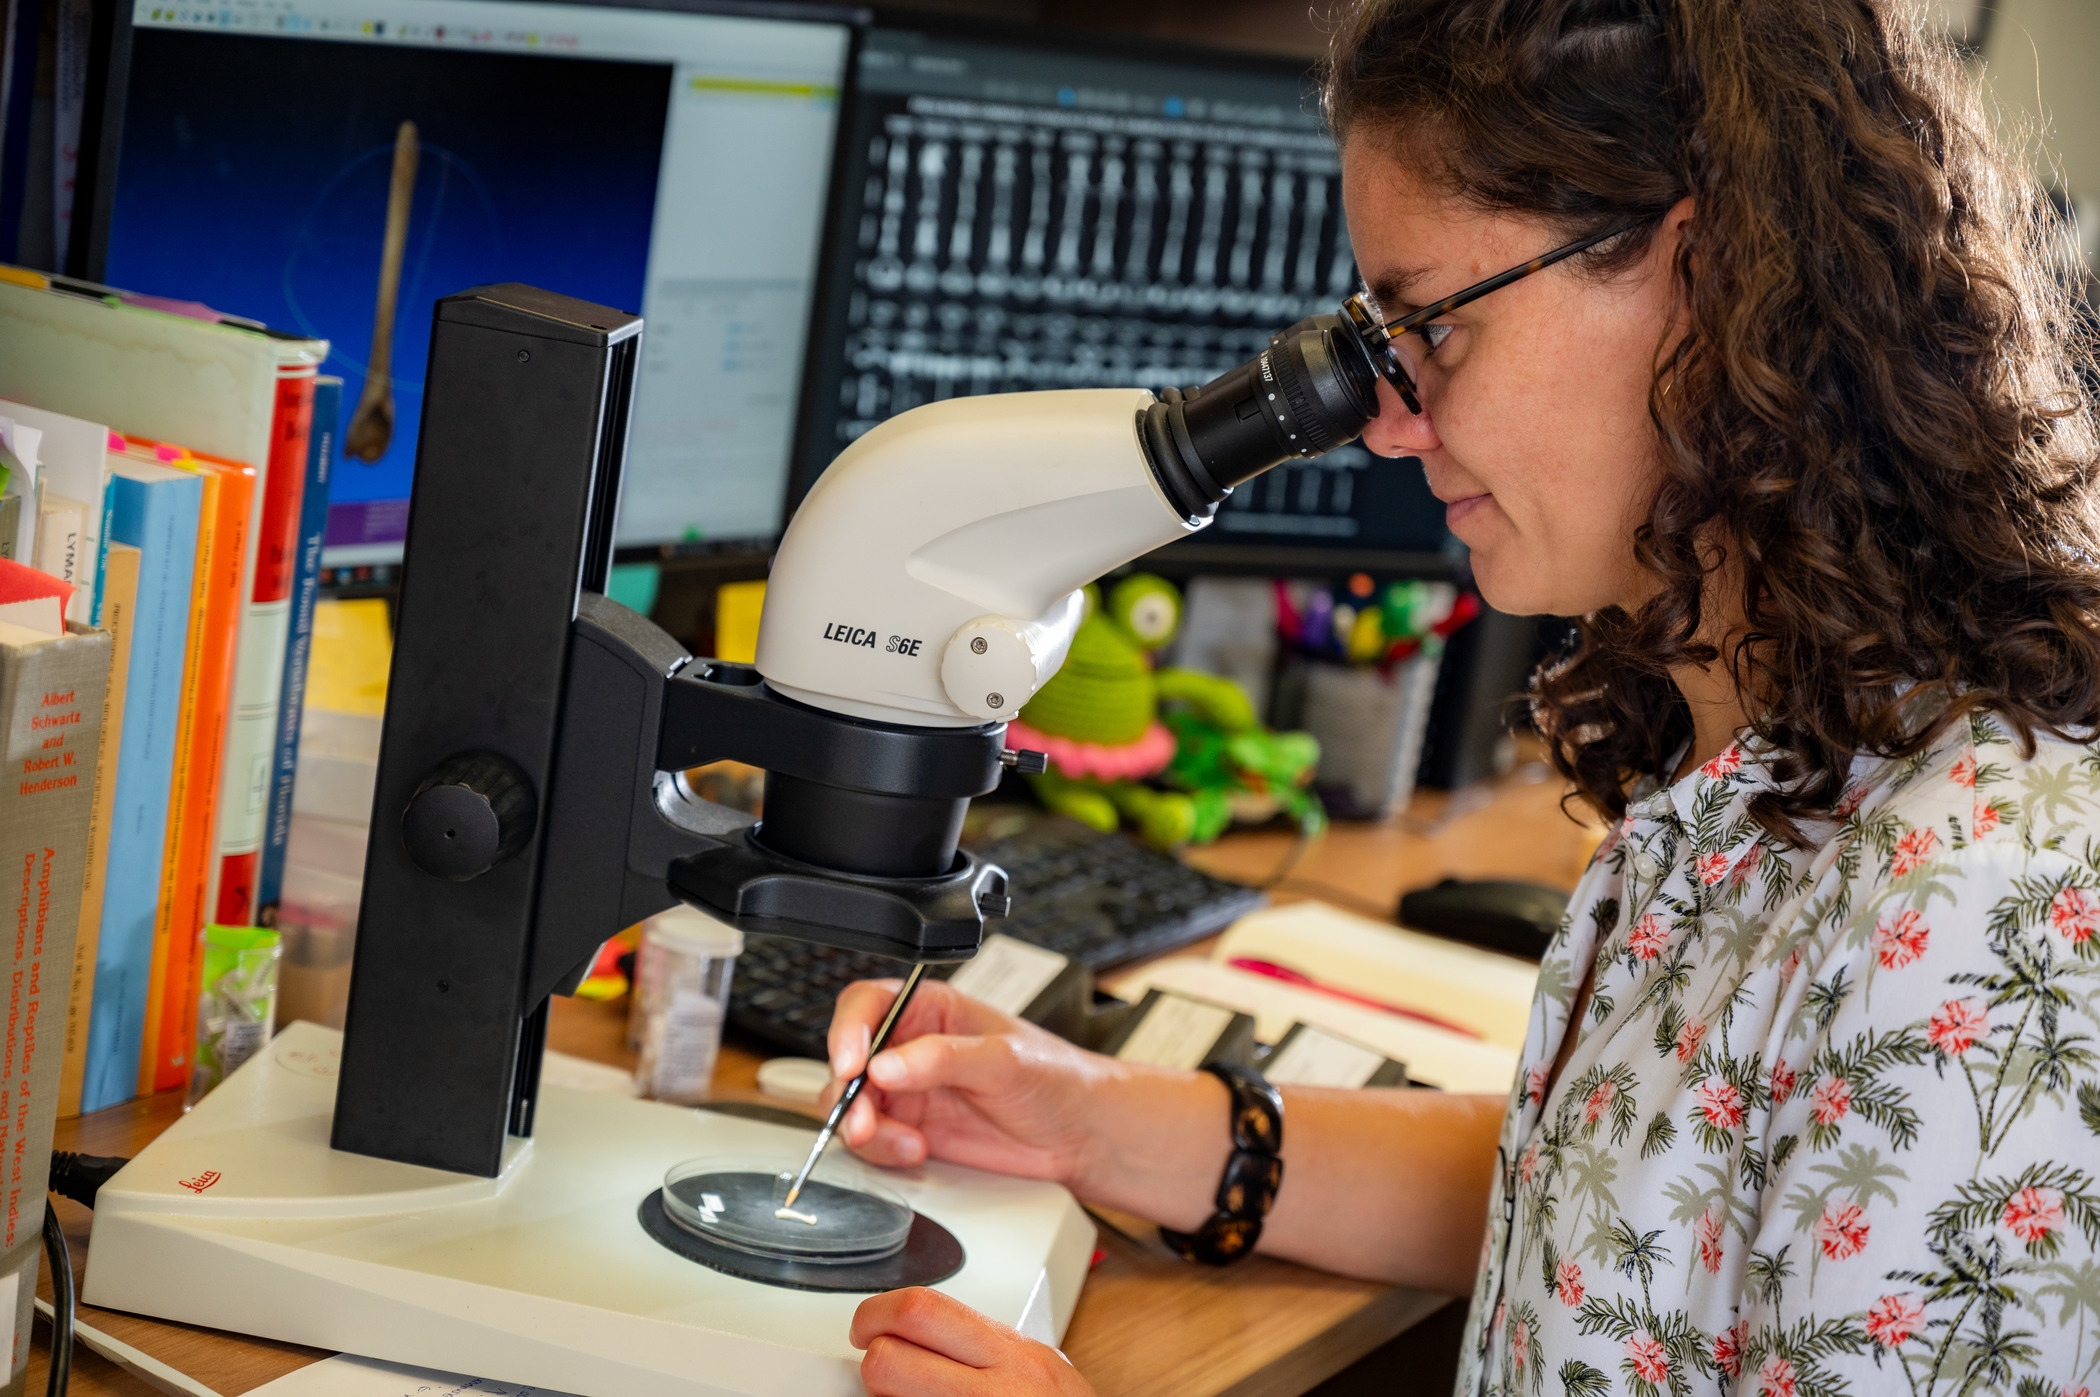 Maria Vallejo, PhD student at the University of Florida, looks into a microscope. Image courtesy University of Florida.